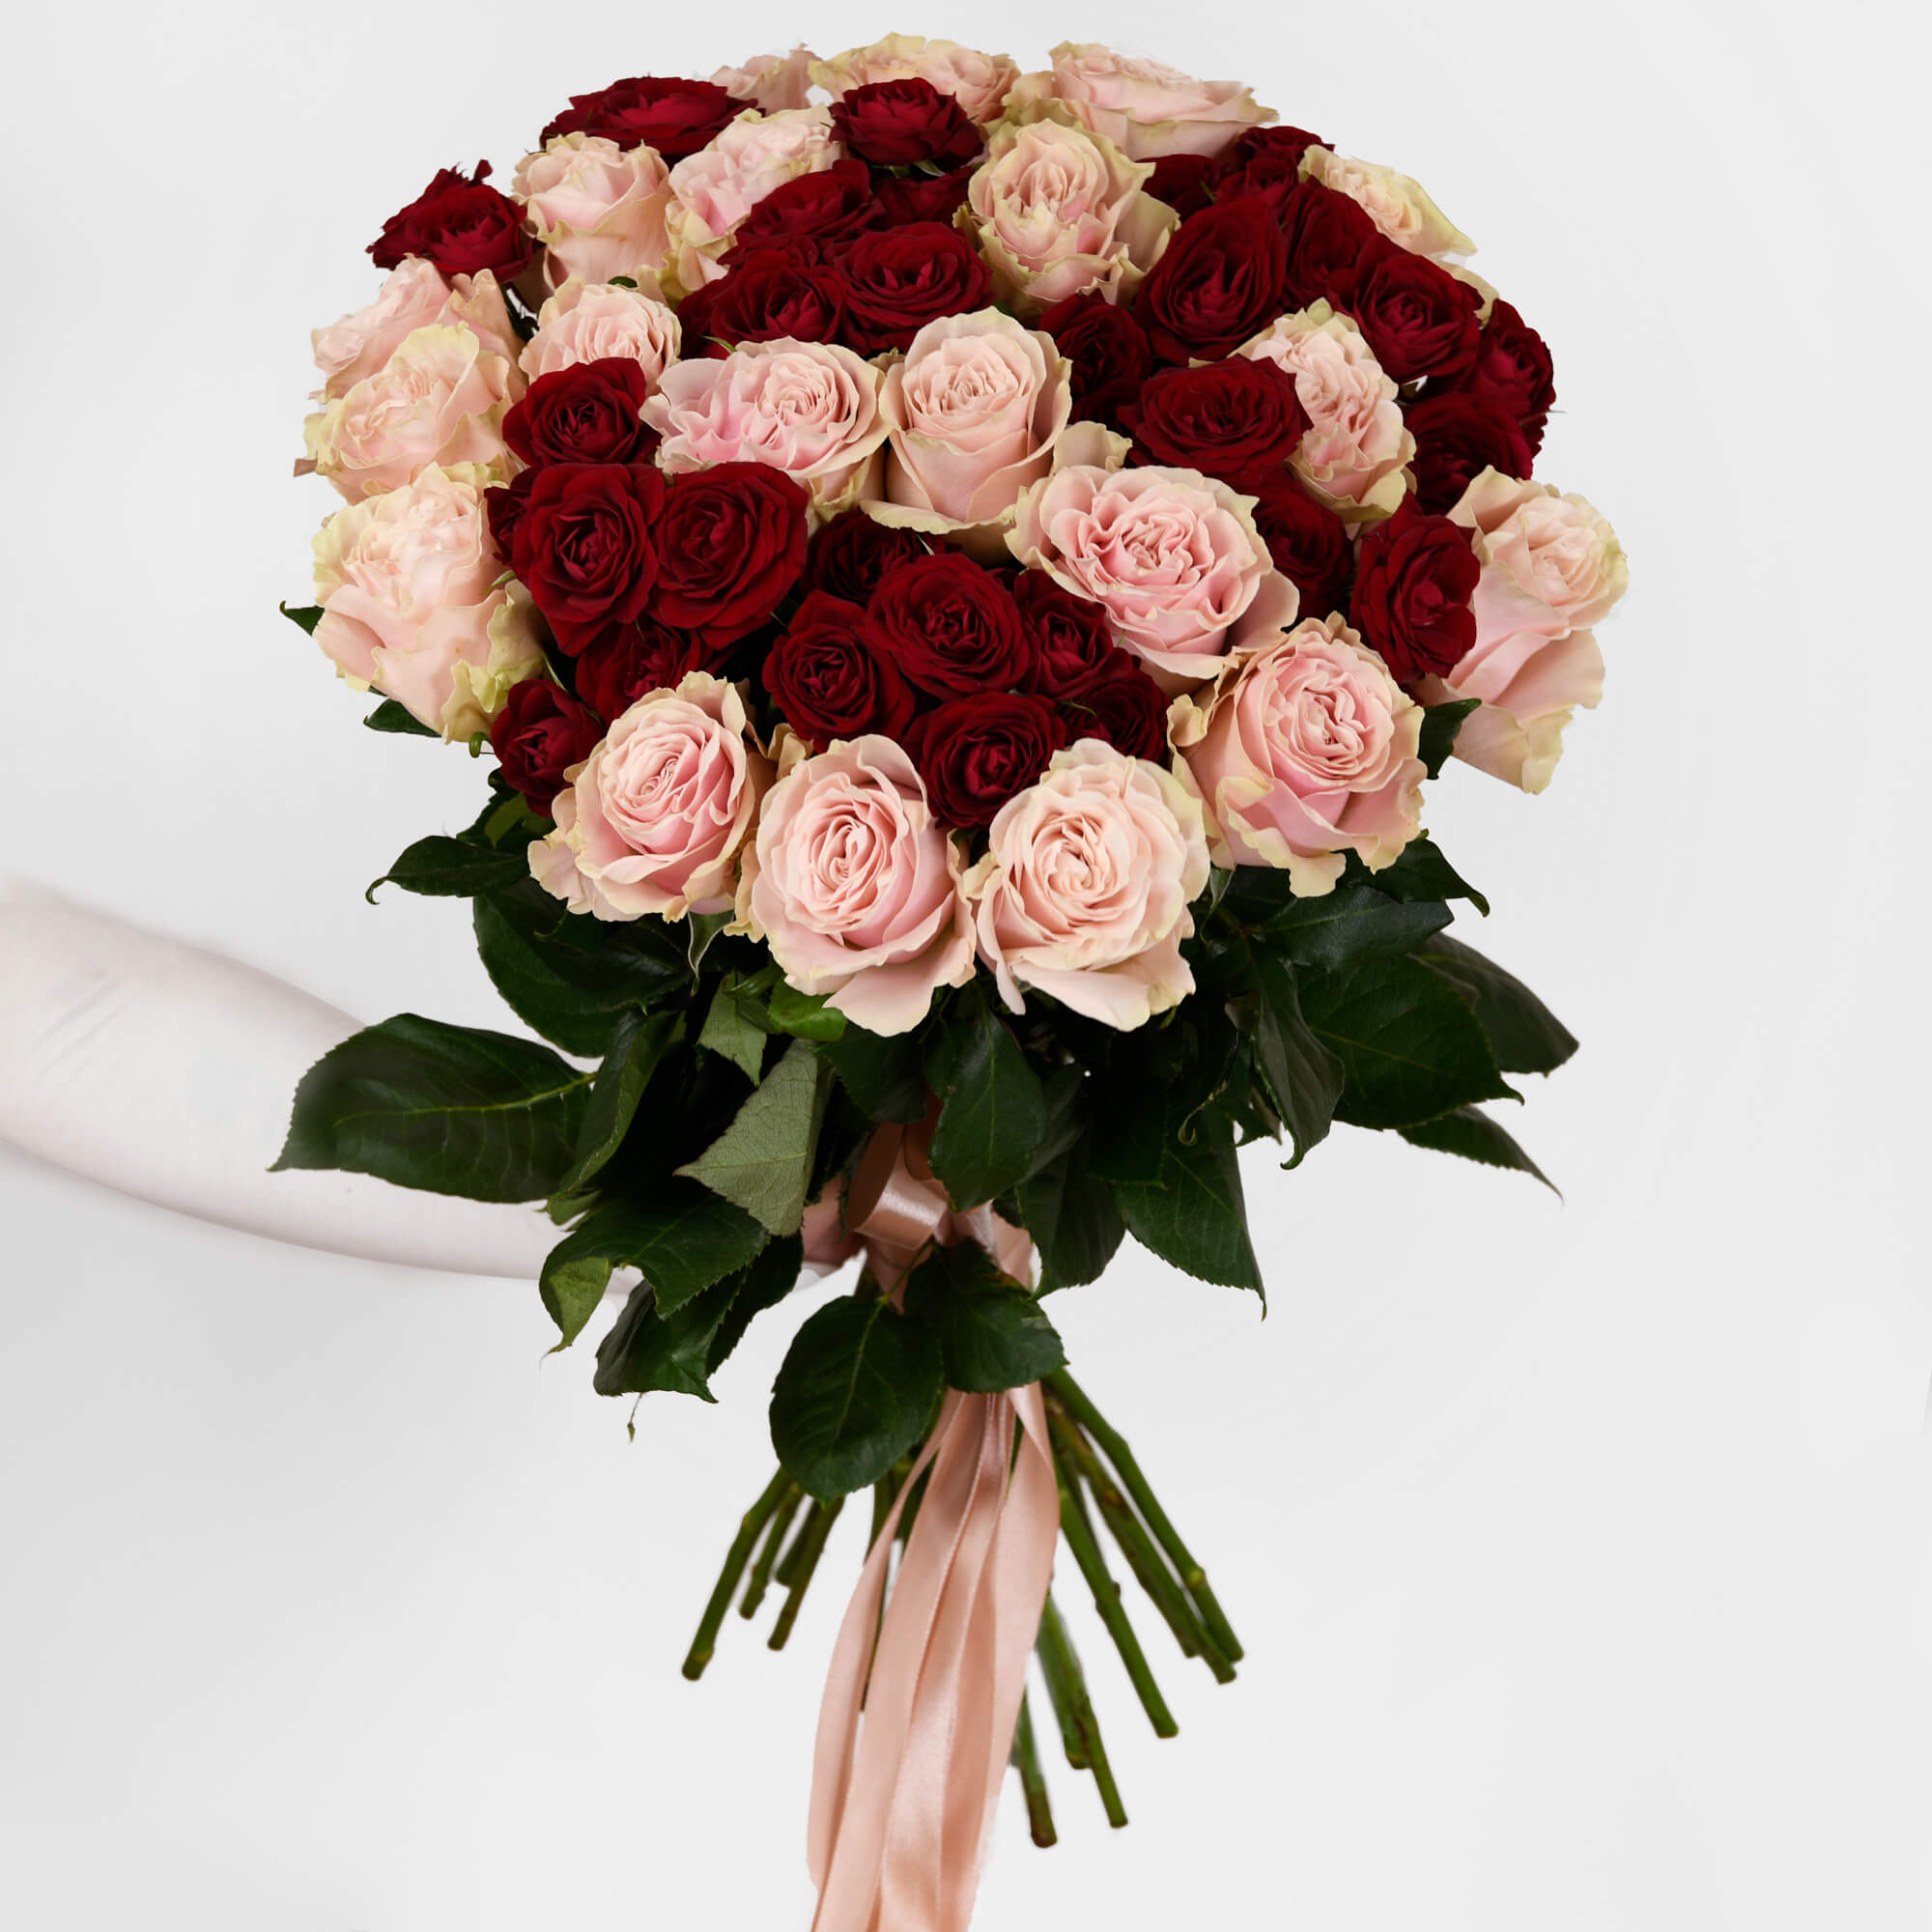 Bouquet of 31 pink and red roses